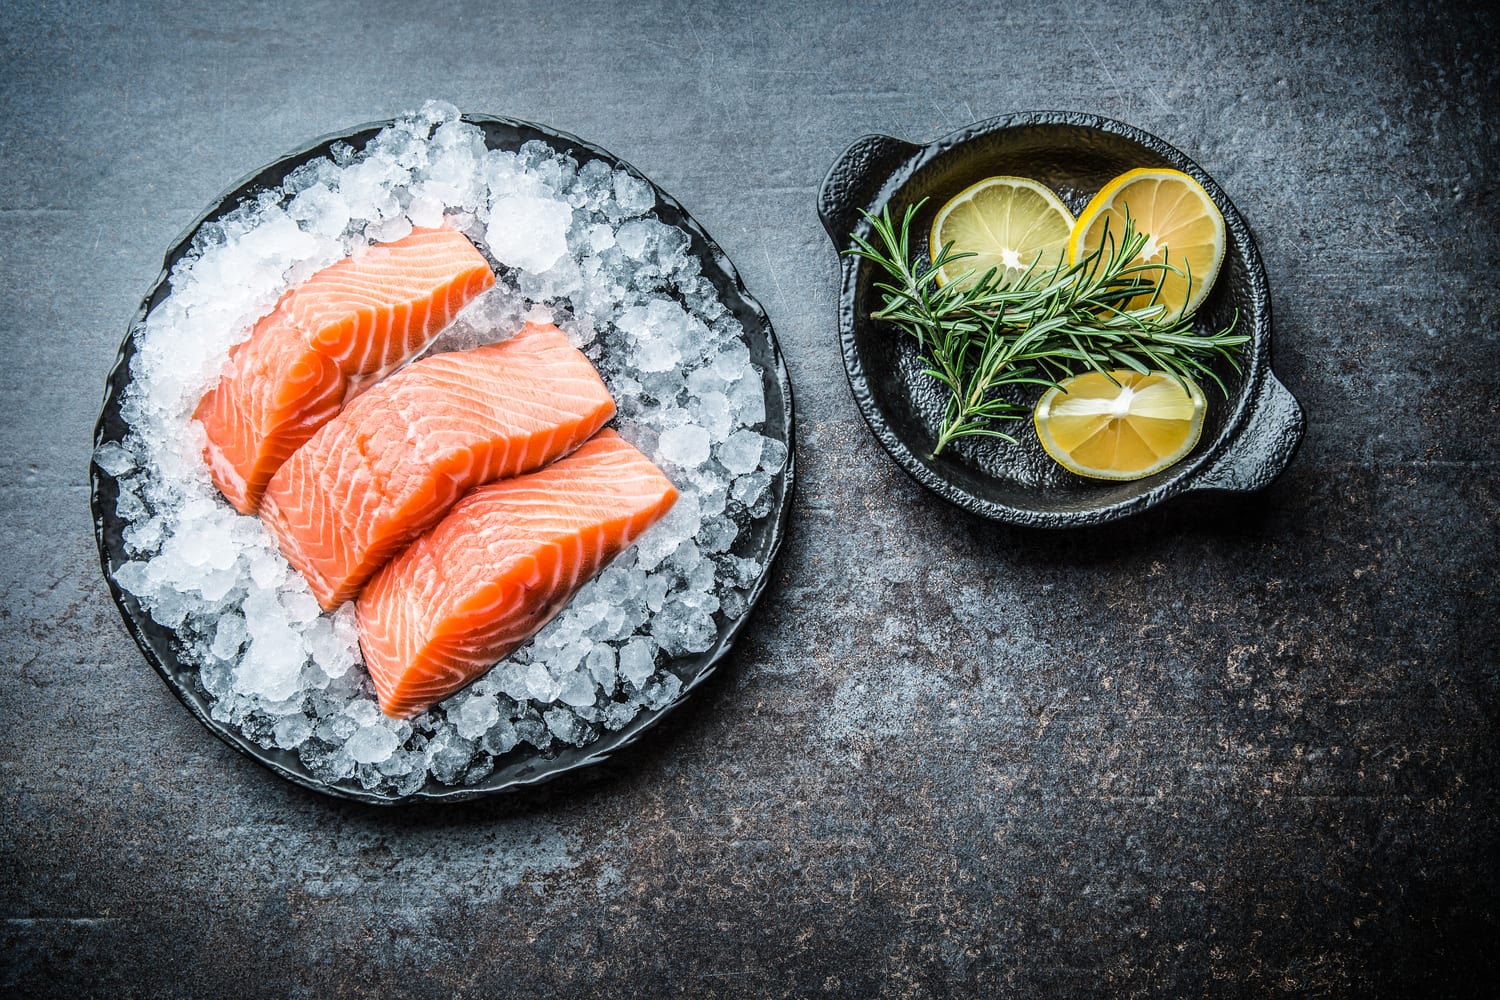 A delectable collection of three salmon filets on ice sitting next to a small bowl of lemon halves.